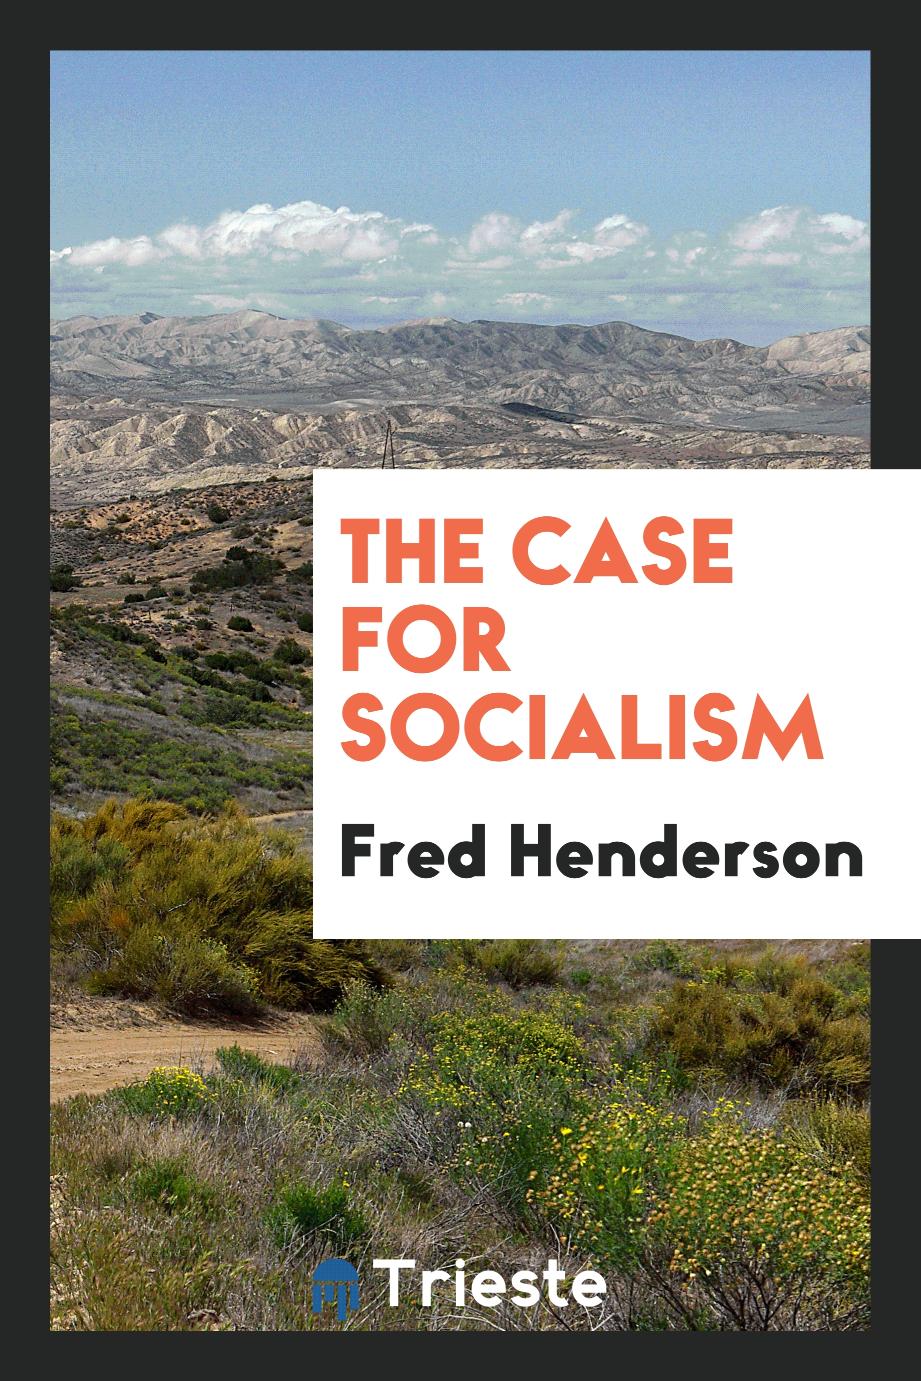 The case for socialism